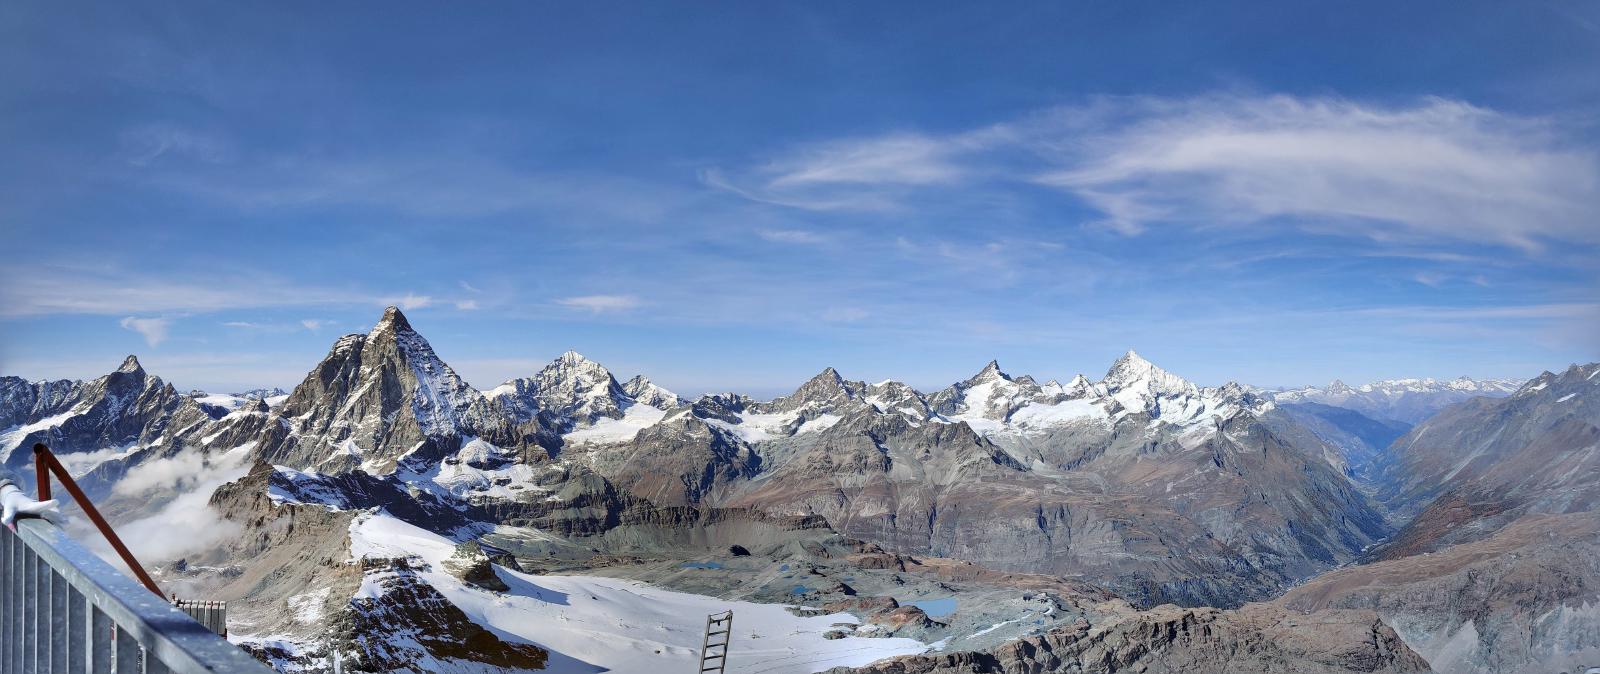 Panorama looking North from the top of Klein Matterhorn (Matterhorn Glacier Paradise viewpoint)